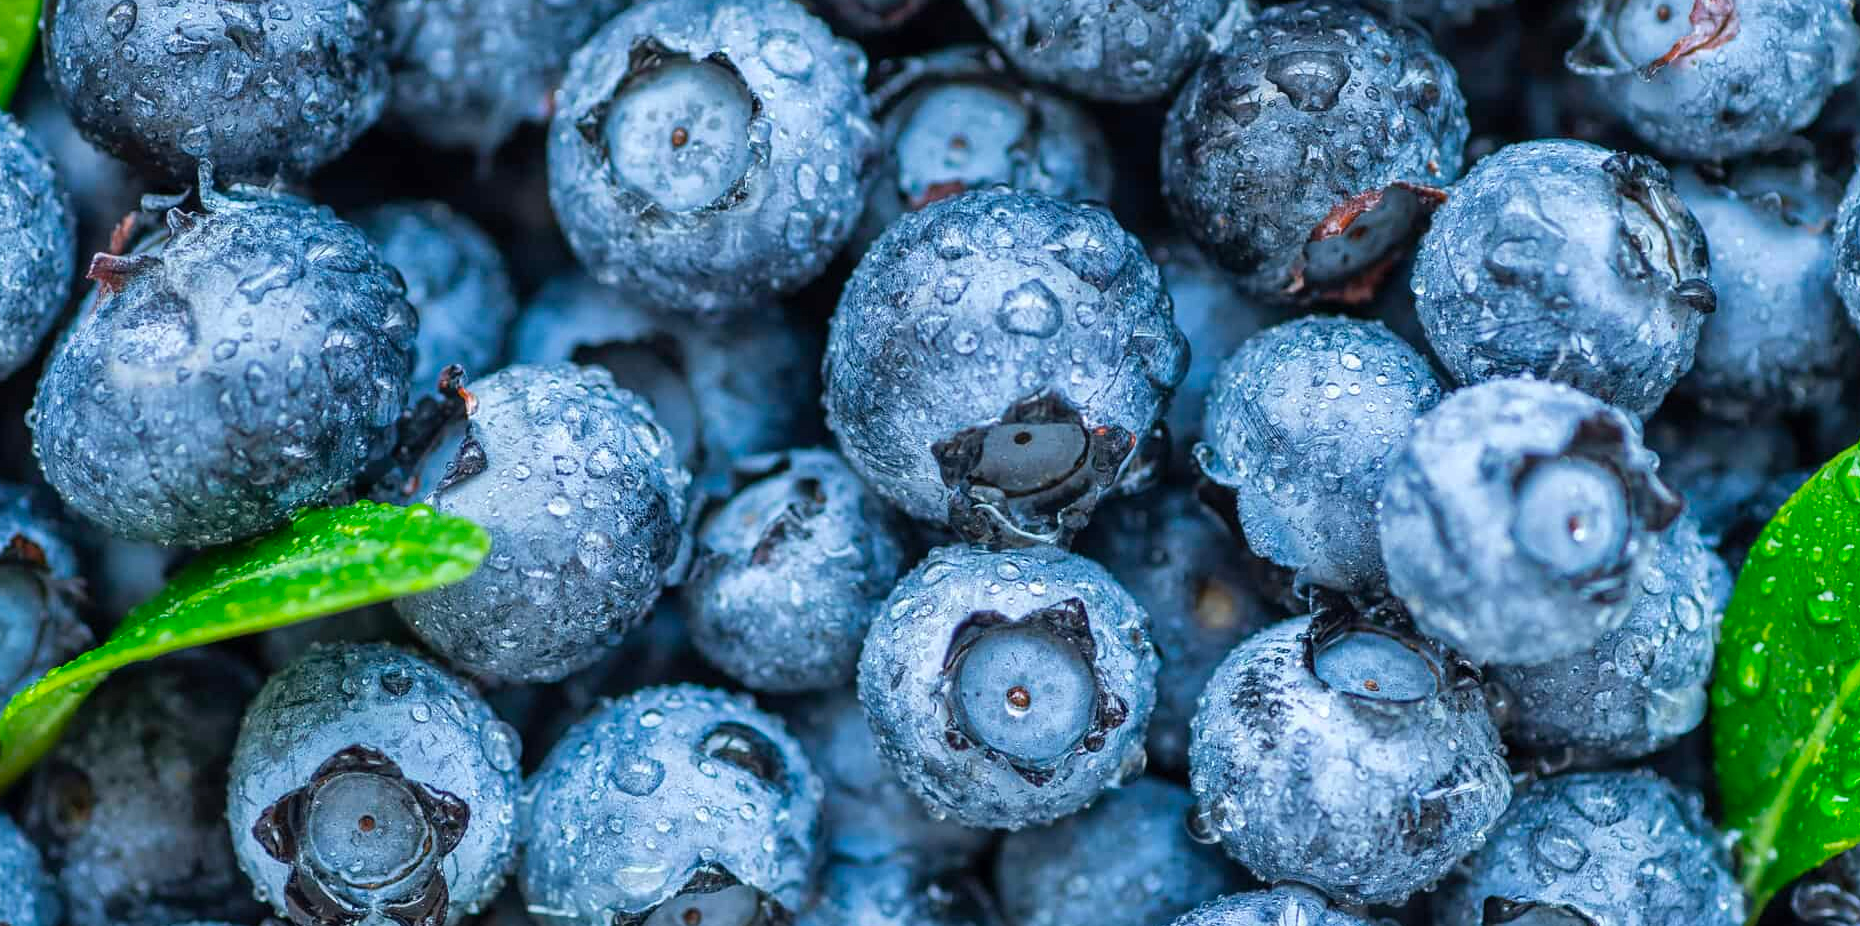 Blueberry: Facts, Nutrition, Benefits & More